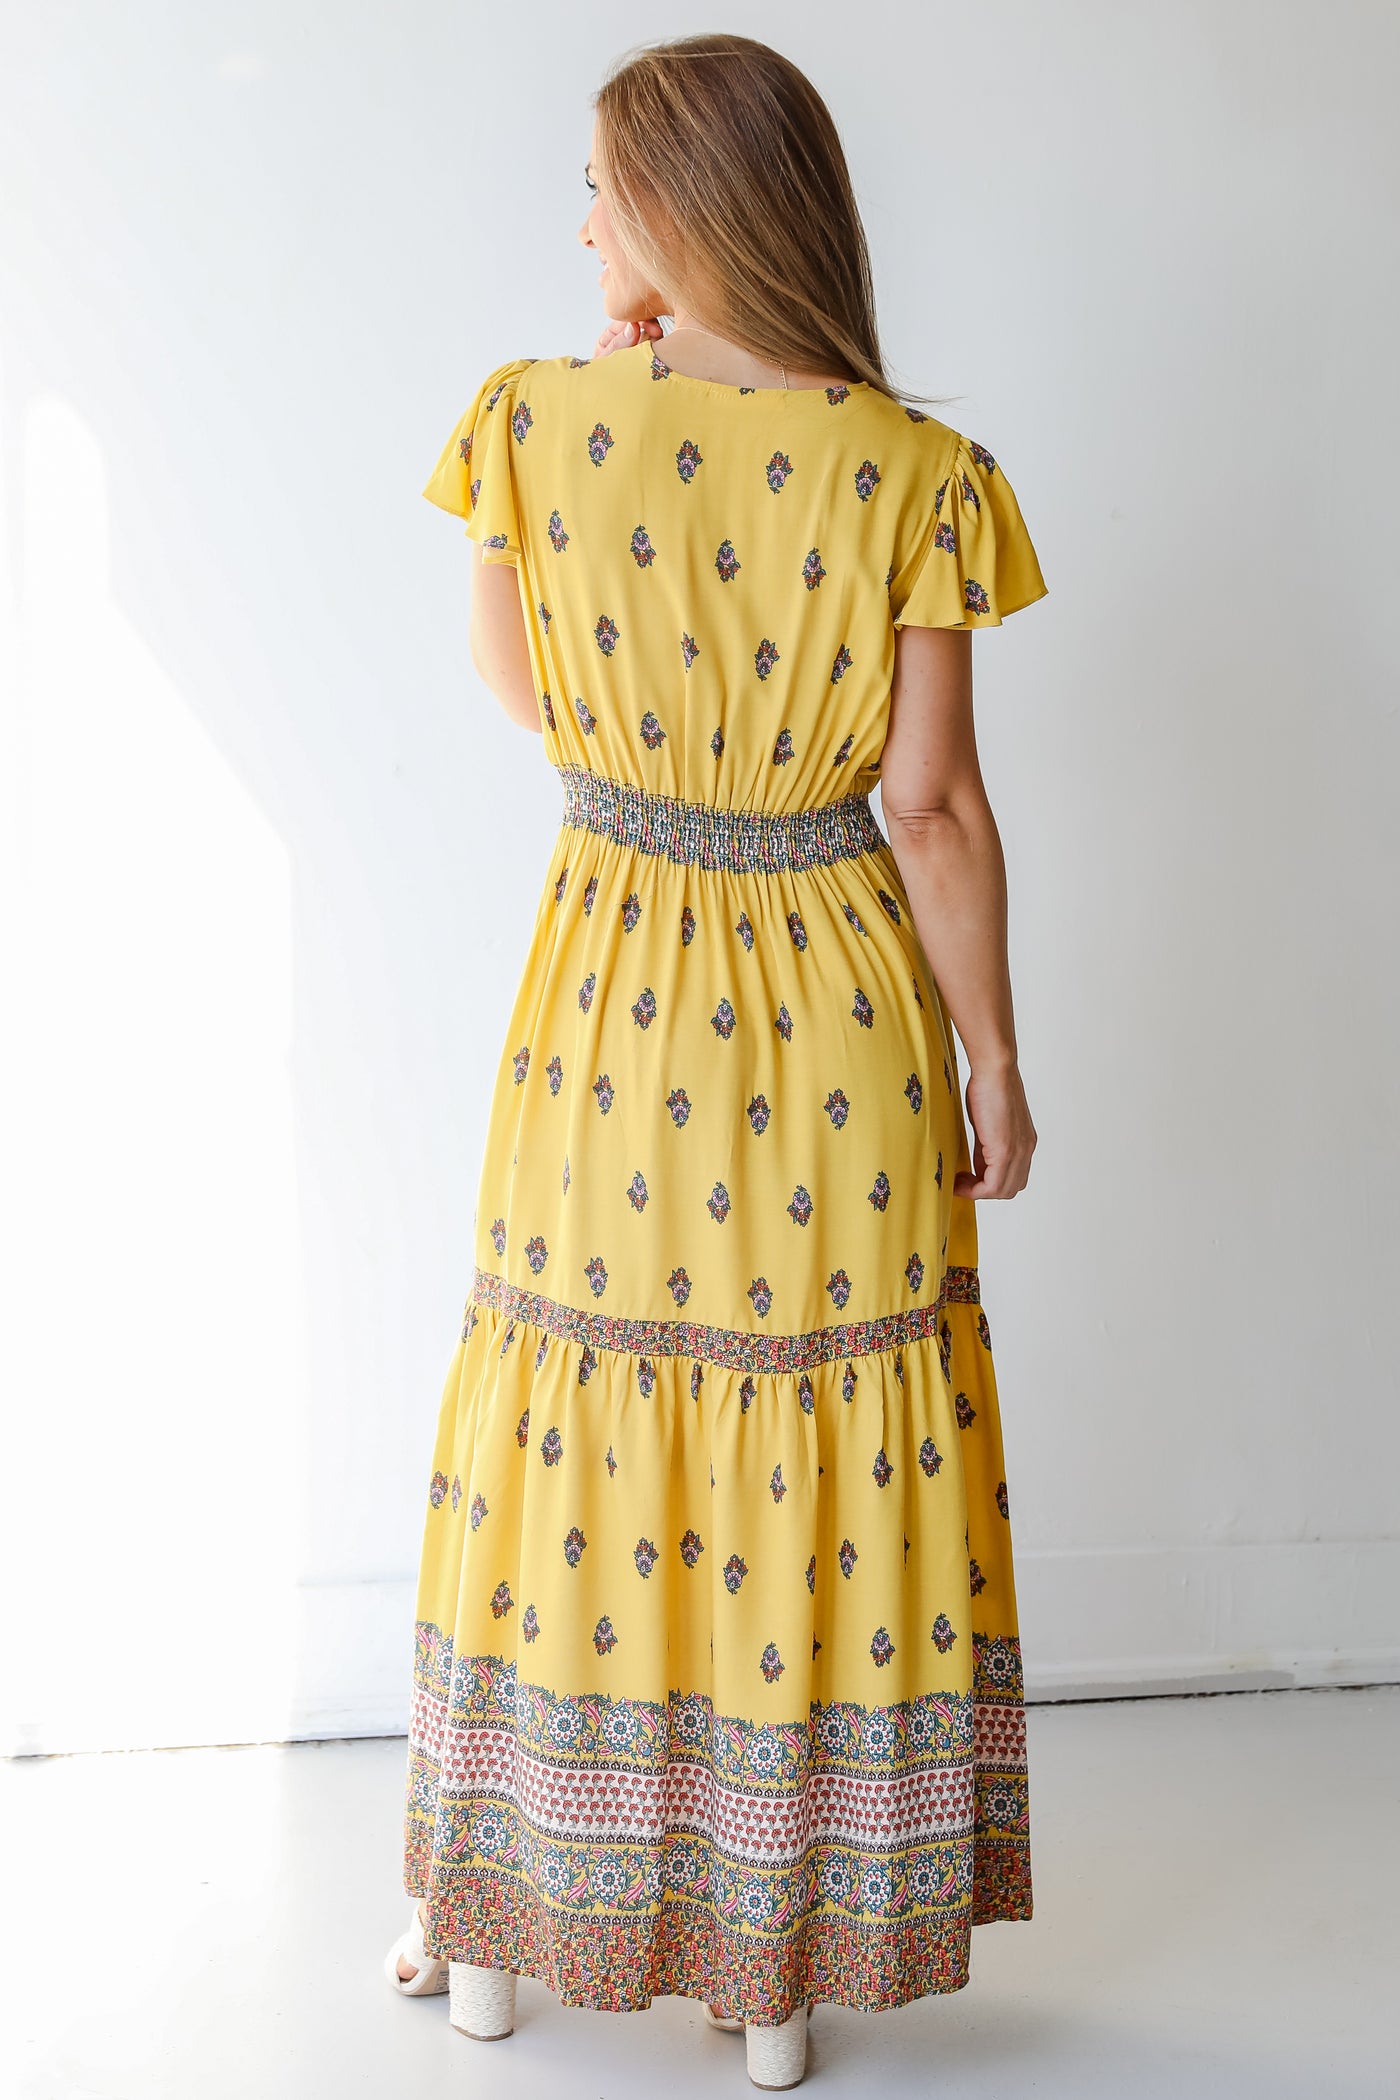 Tiered Floral Maxi Dress in yellow back view